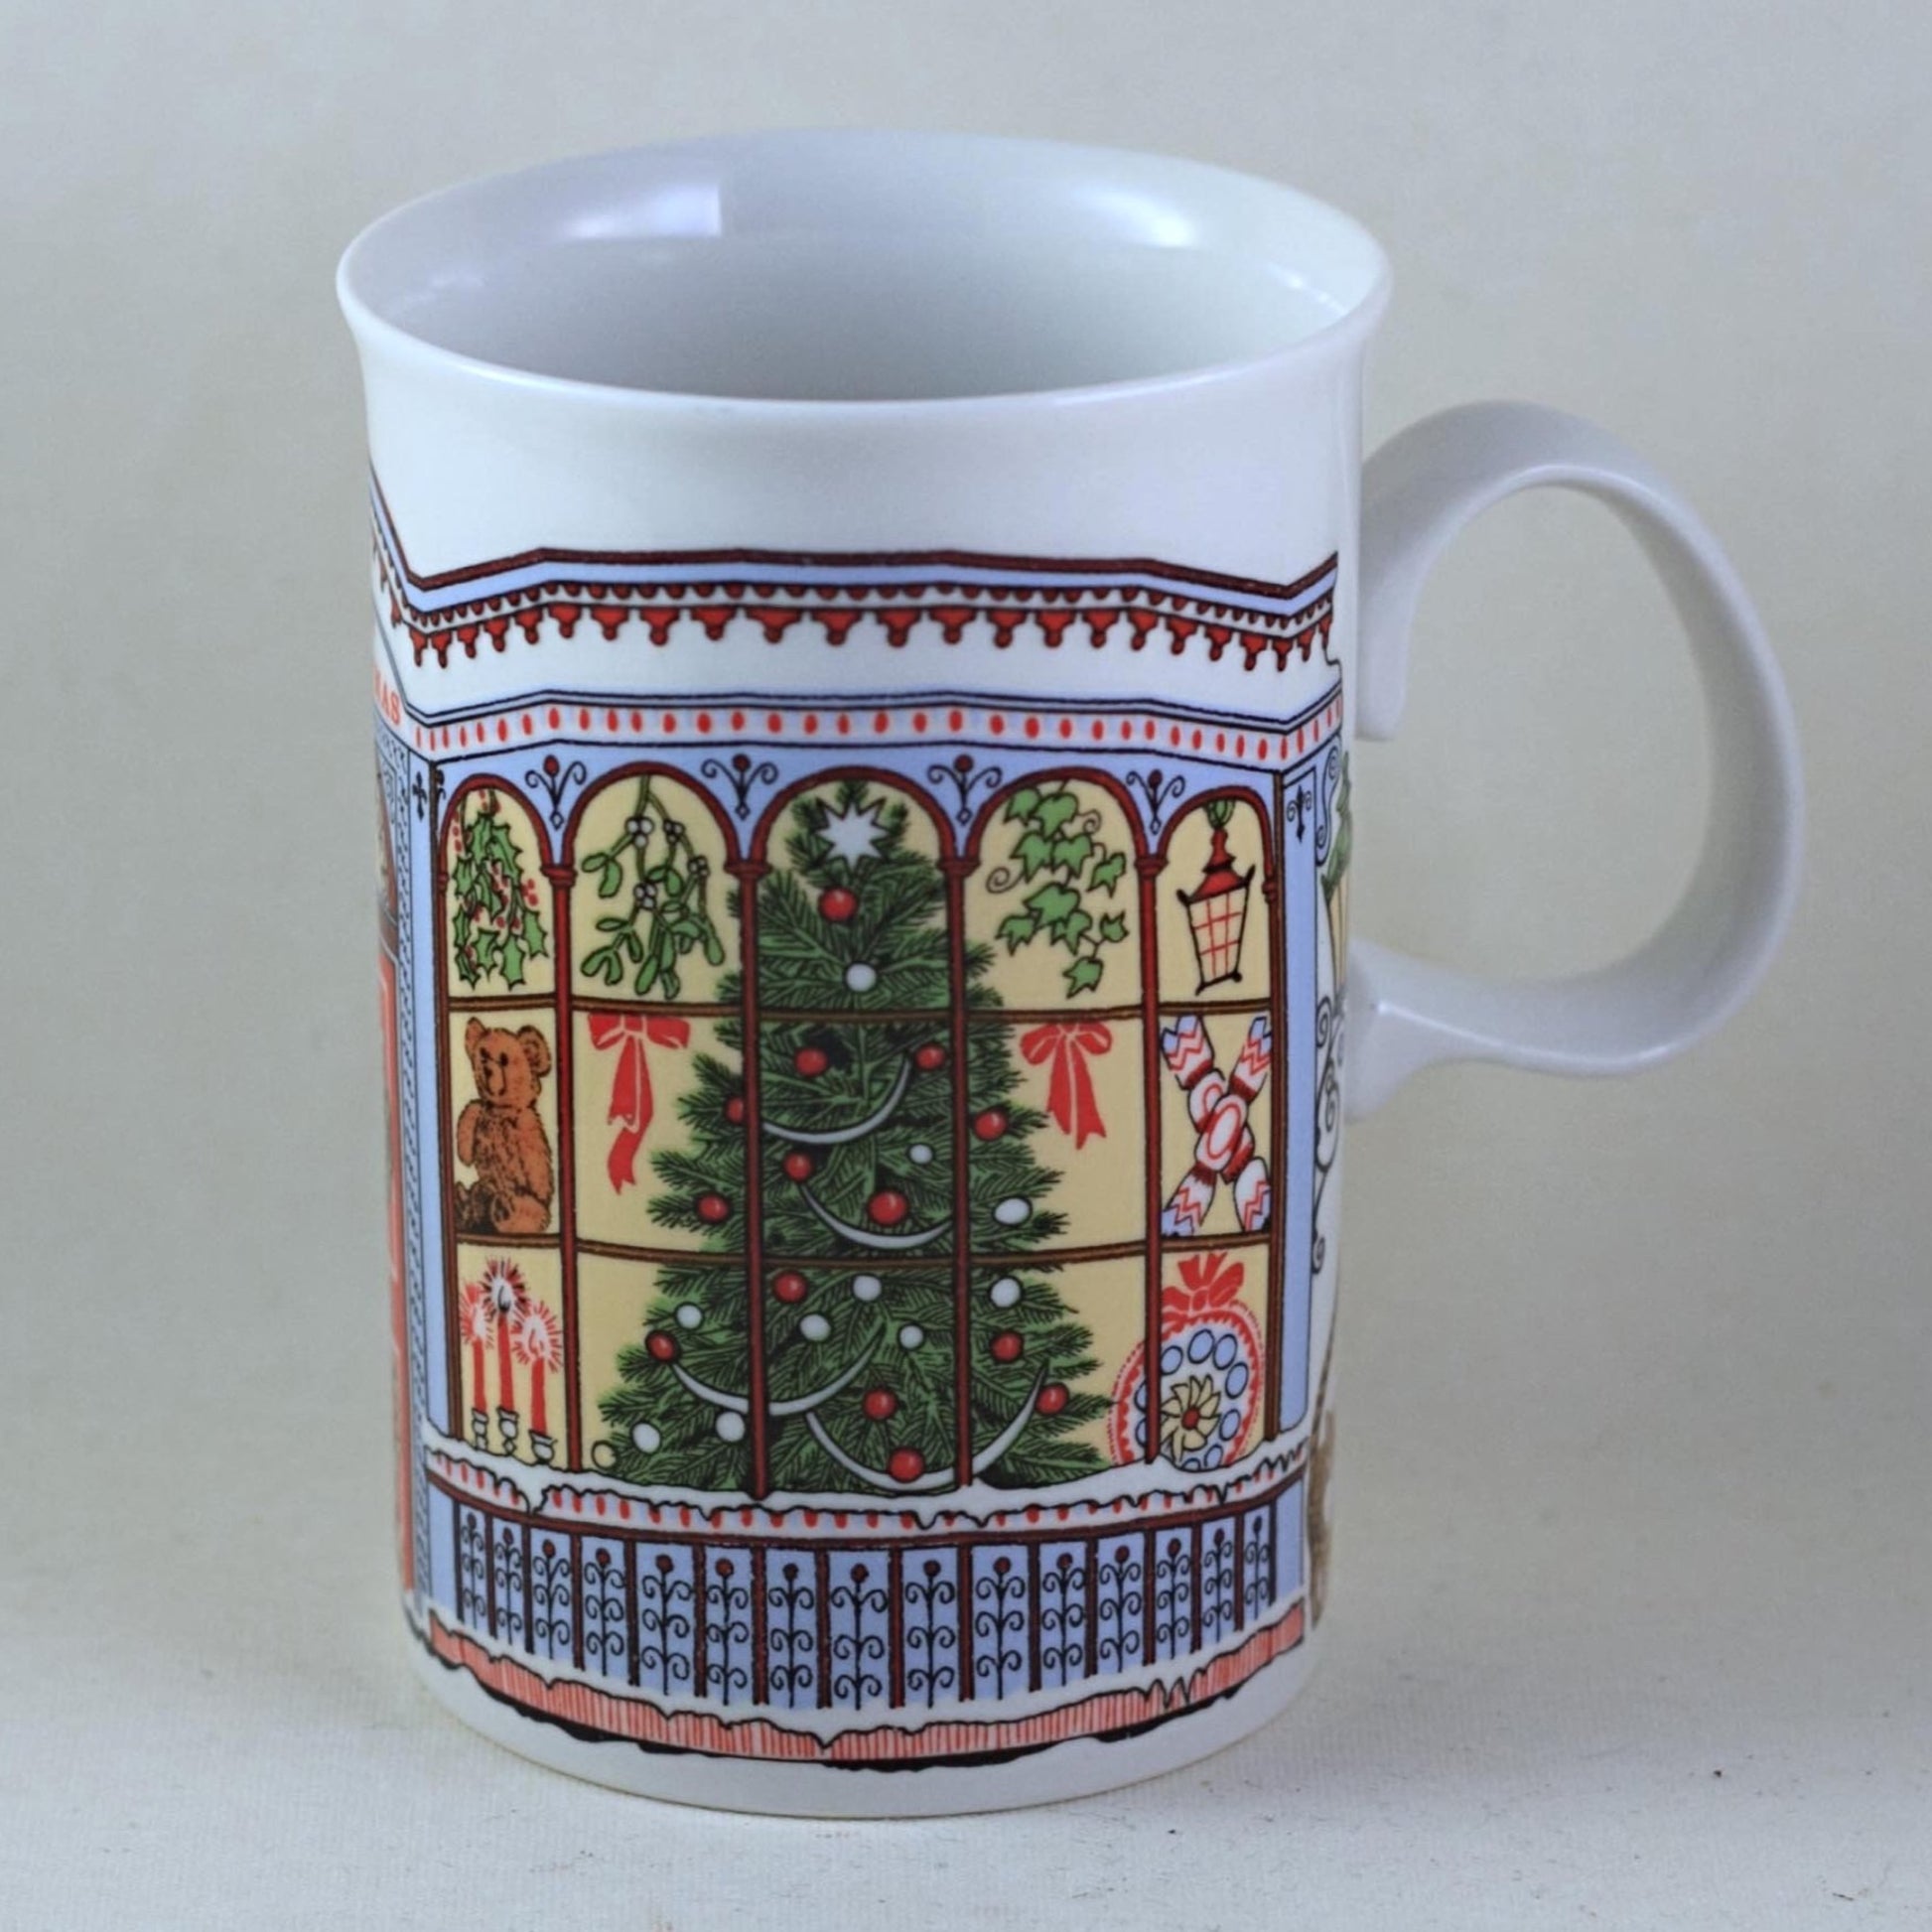 DUNOON SUE SCULLARD Mug Christmas Storefront with Cats